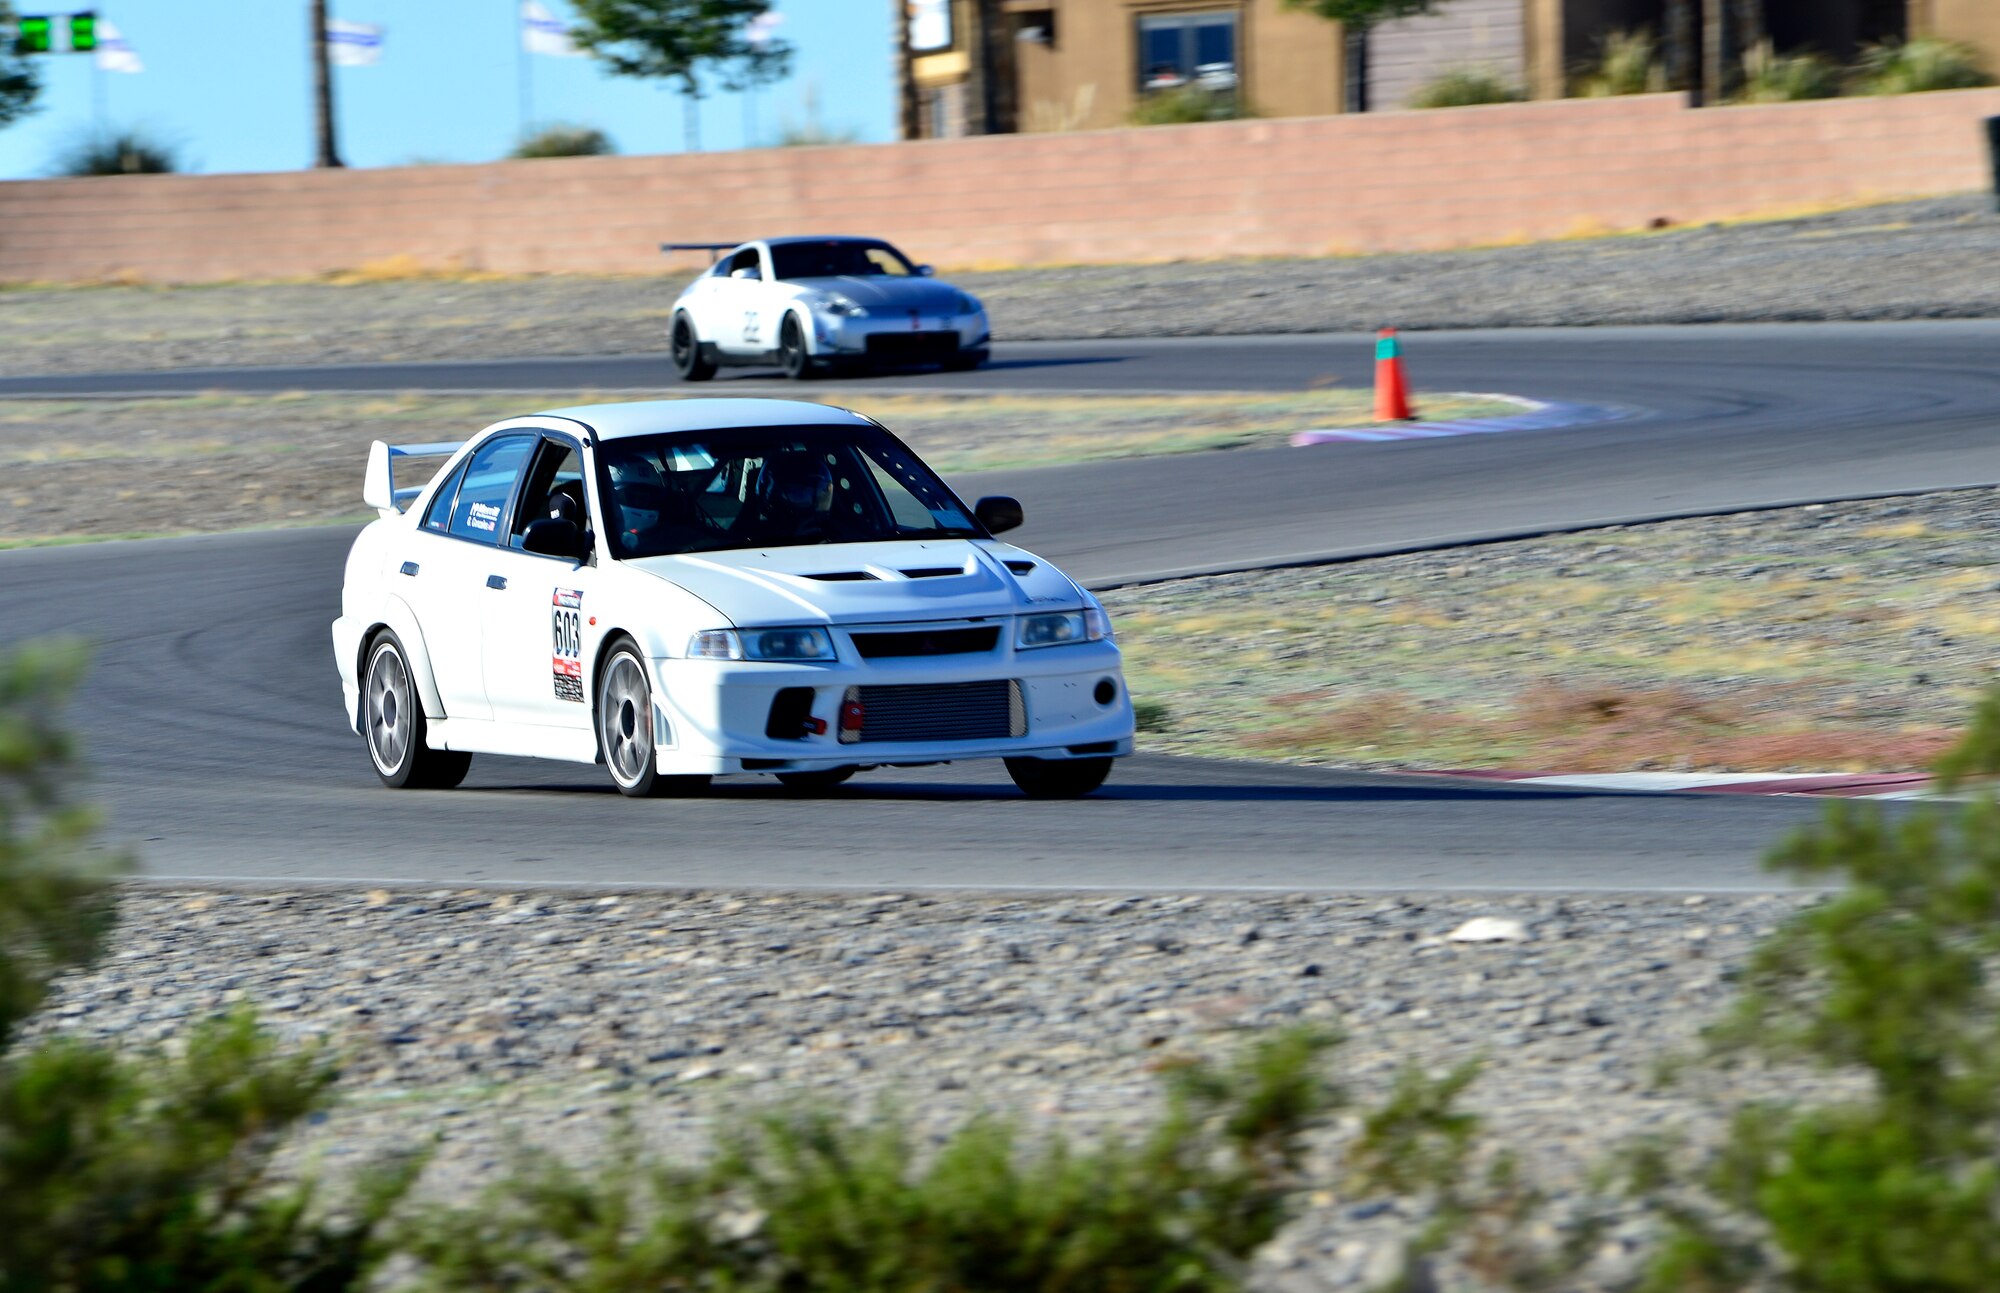 Tech. Sgt. Gabriel, a 432nd Wing/432nd Air Expeditionary Wing MQ-9 Reaper sensor operator, races his Mitsubishi Lancer Evolution at the Spring Mountain Raceway Nov. 1, 2015, in Pahrump, Nevada. Gabriel has owned and modified his Evolution for over five years. He's upgraded everything from the engine, suspension, brakes, and safety equipment to compete in time attack style racing. (U.S. Air Force photo/Airman 1st Class Christian Clausen) 